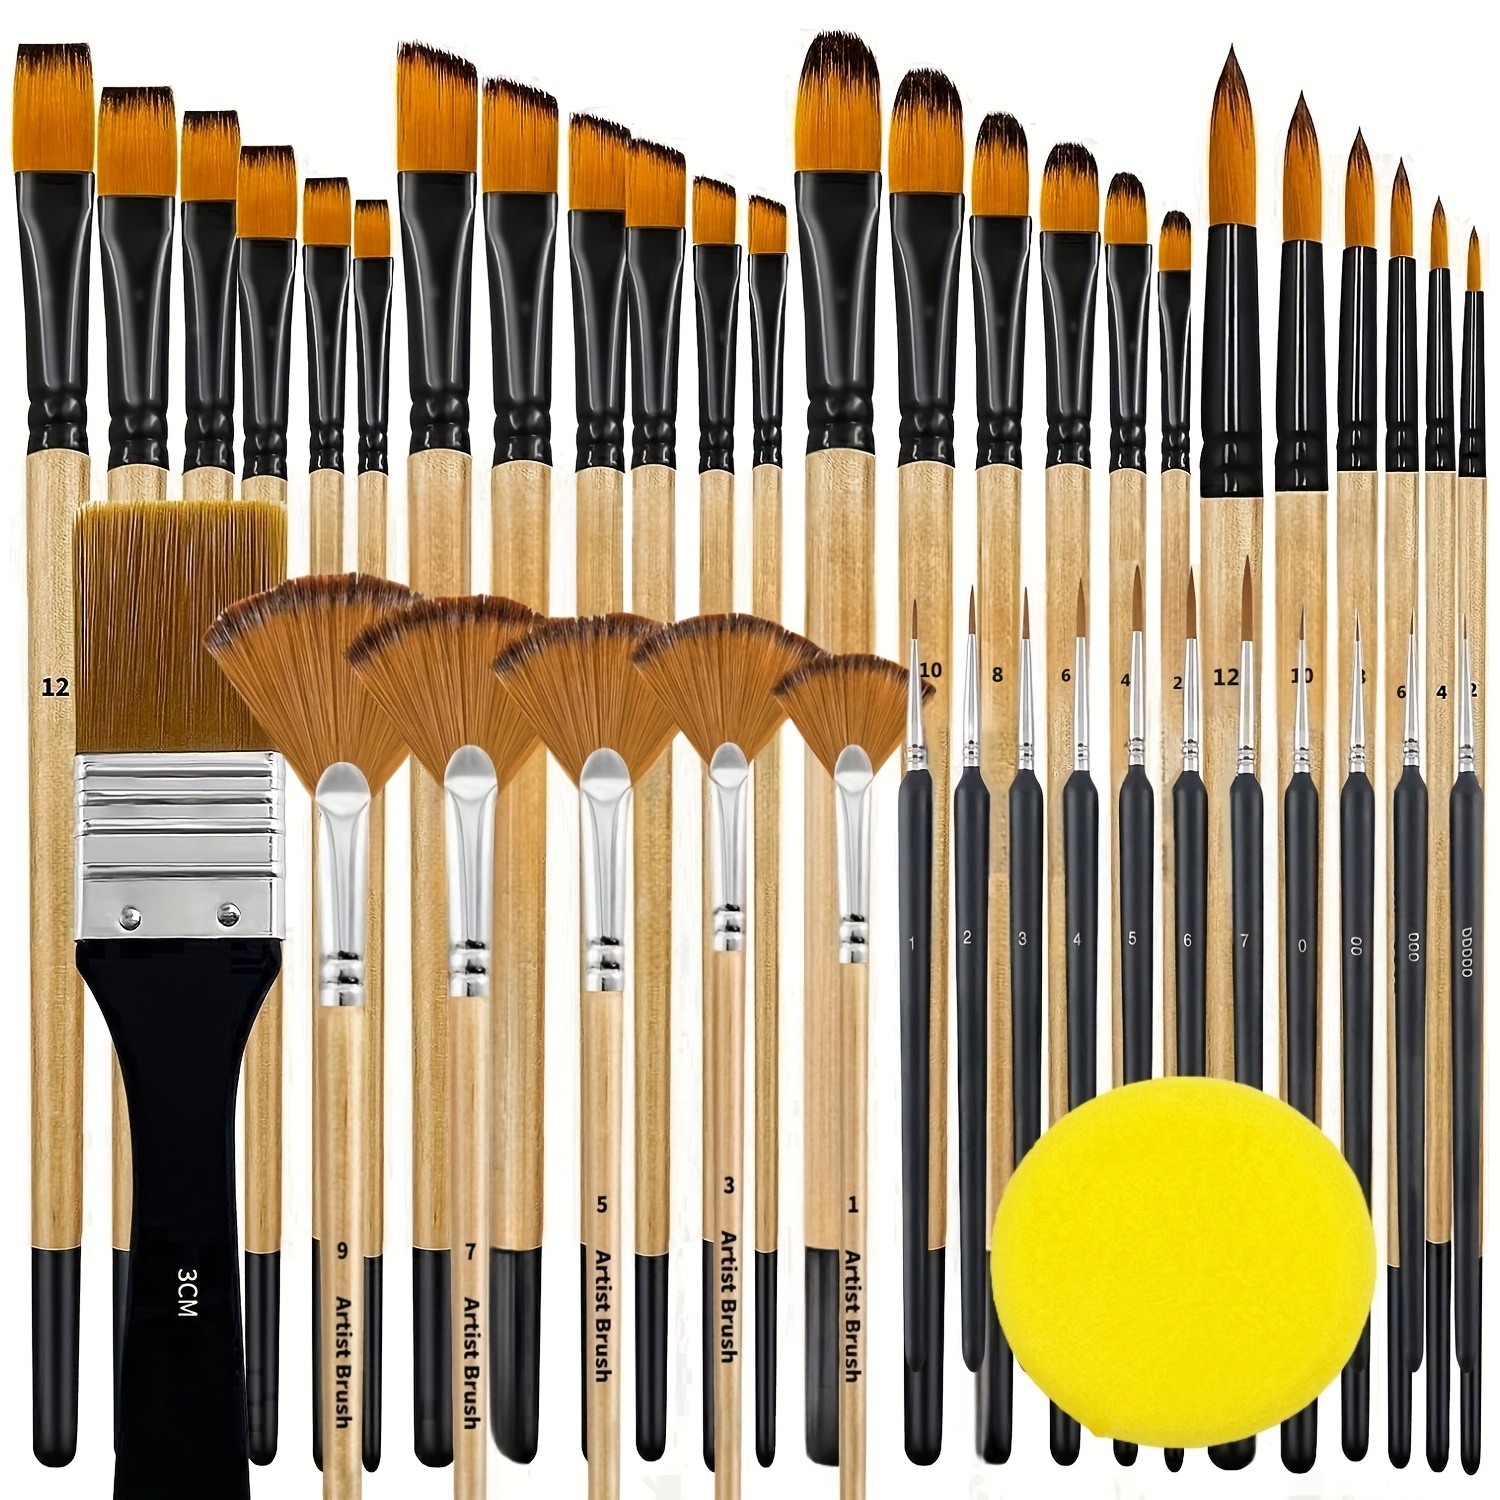 

42pcs Paint Brushes Set For Artists And Beginners, Nylon Bristles Suit For Acrylic Painting, Watercolor, Oil, Gouache, Brush Tip Contain Flat, Round, Angle, Filbert, Fan, Detail Brushes.